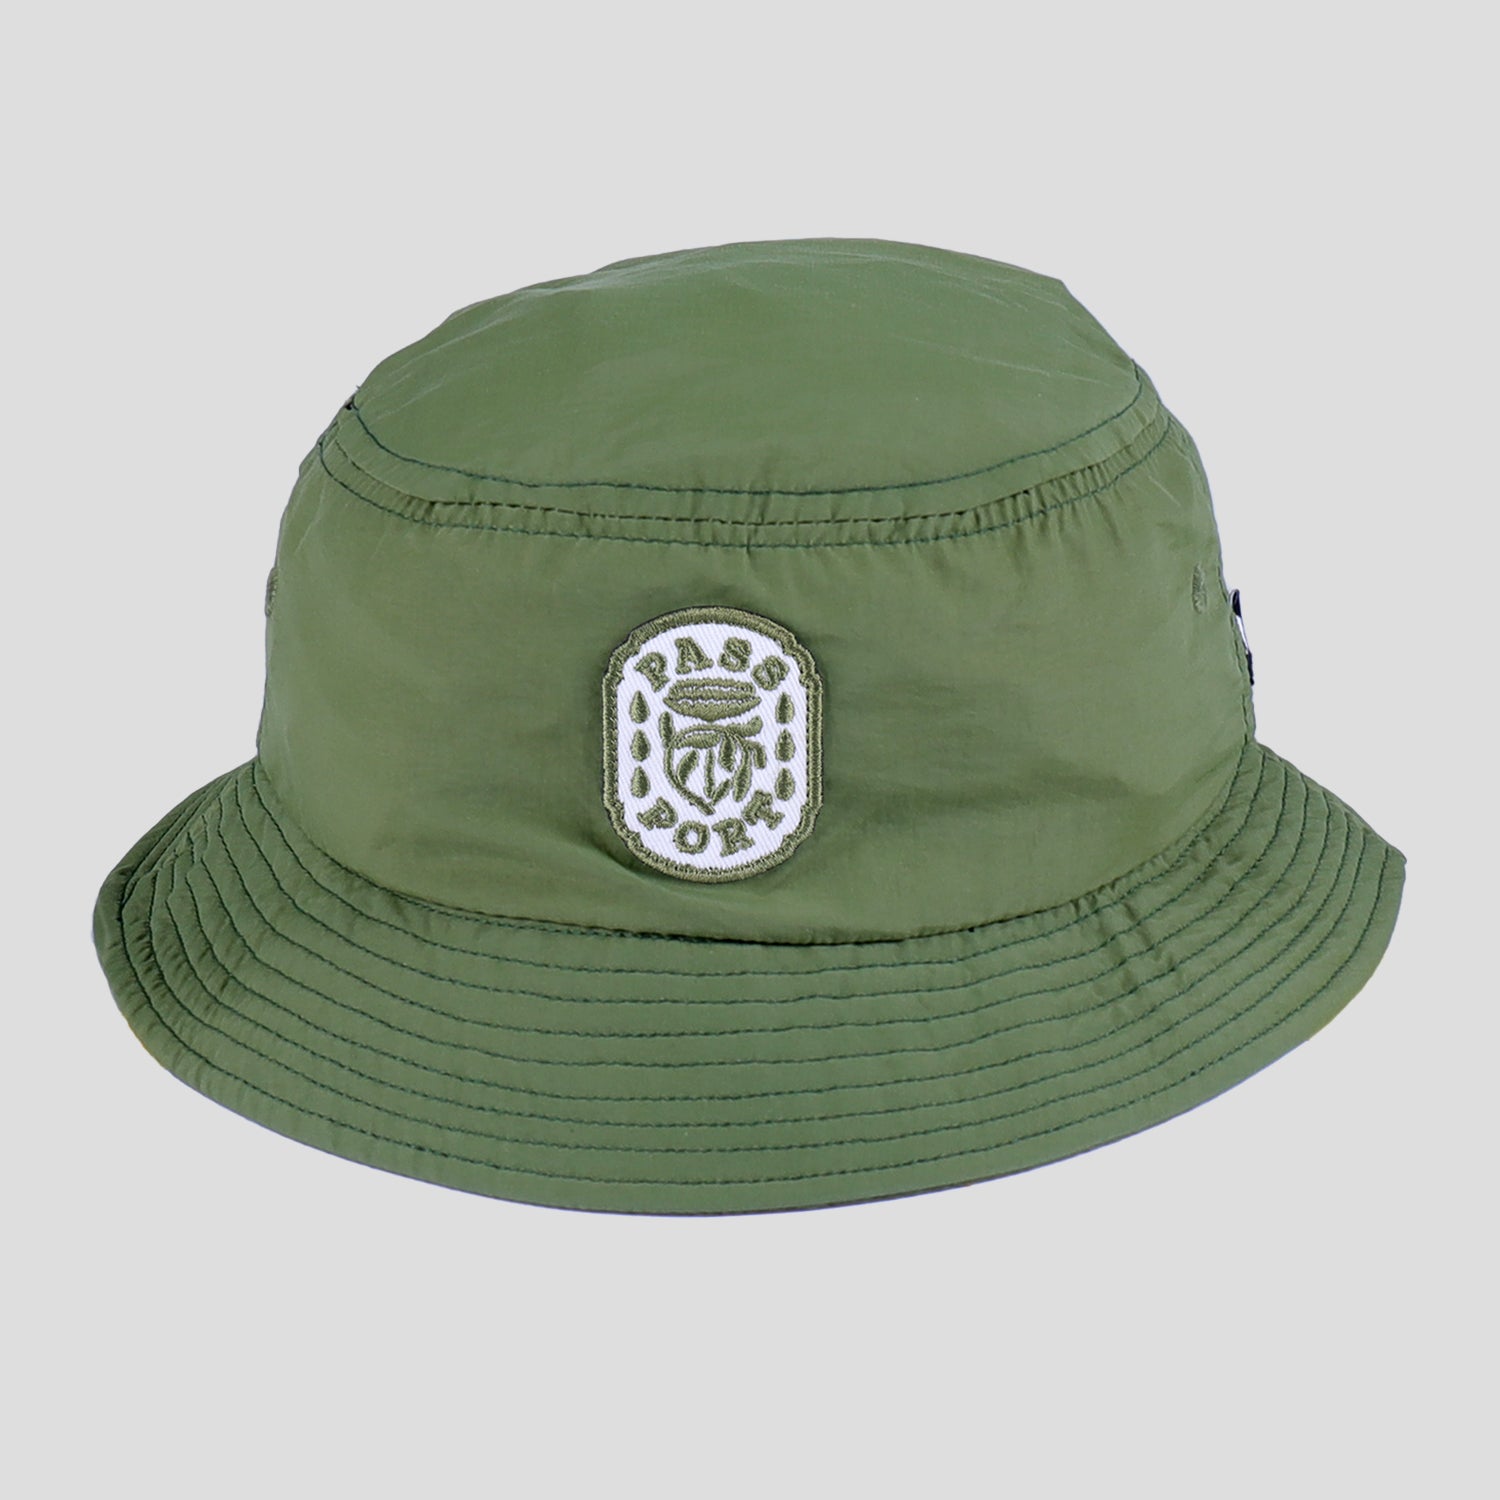 Pass~Port Fountain RPET Bucket Hat - Olive